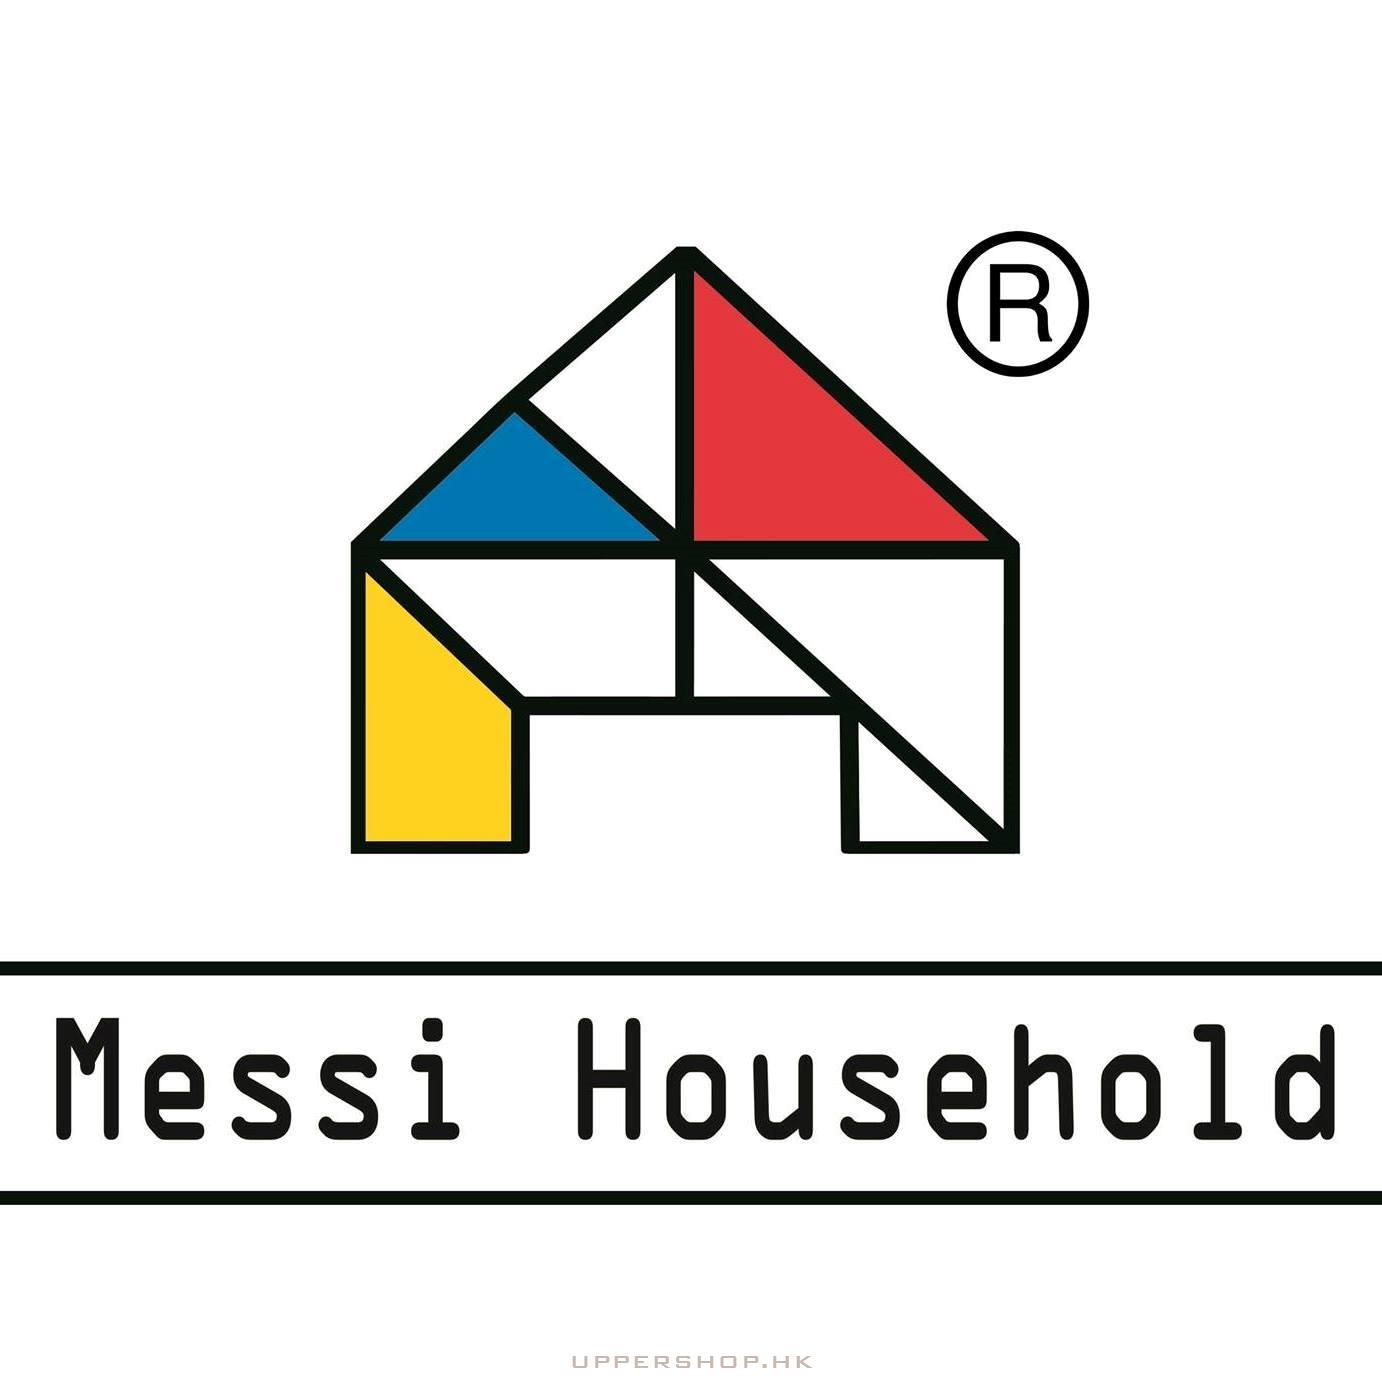 Messi Household